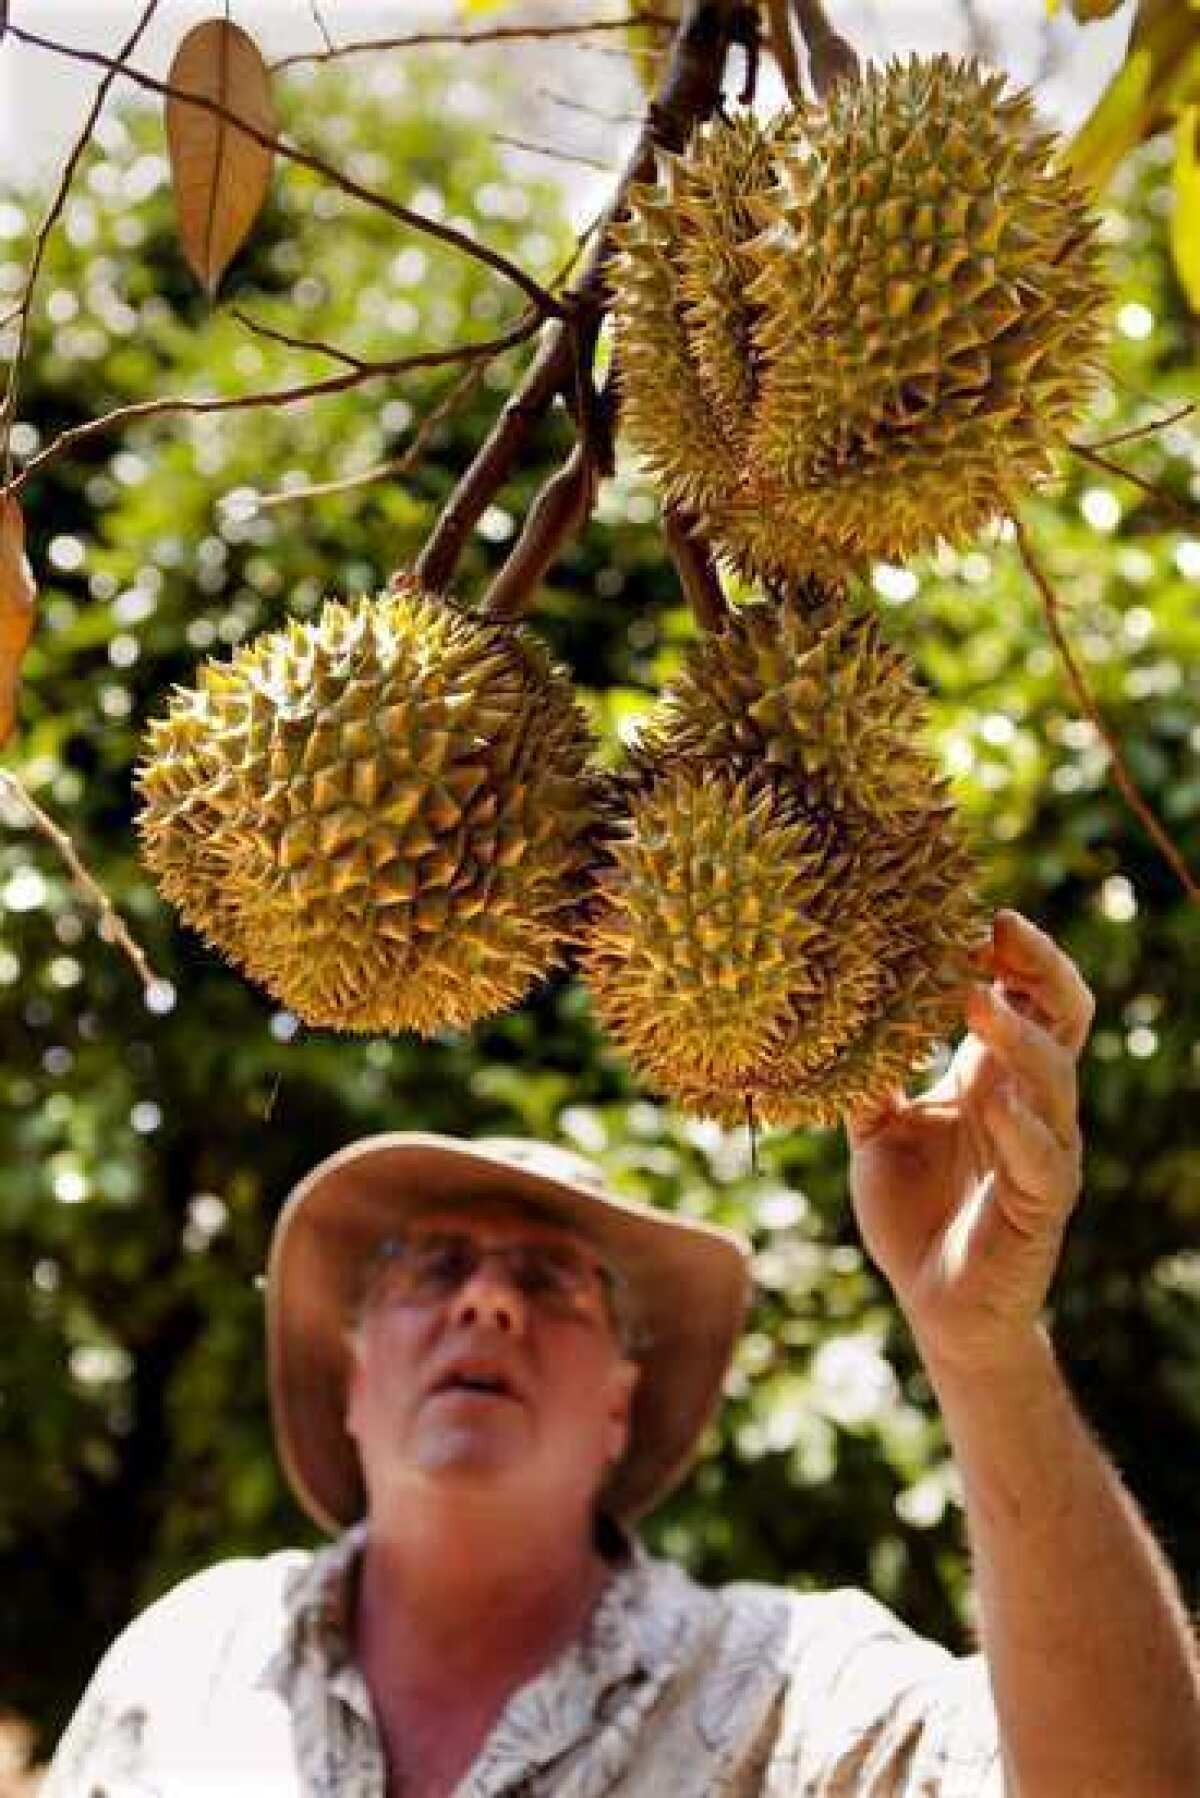 Ken Love, an exotic fruit specialist, reaches for durian grown in Captain Cook.